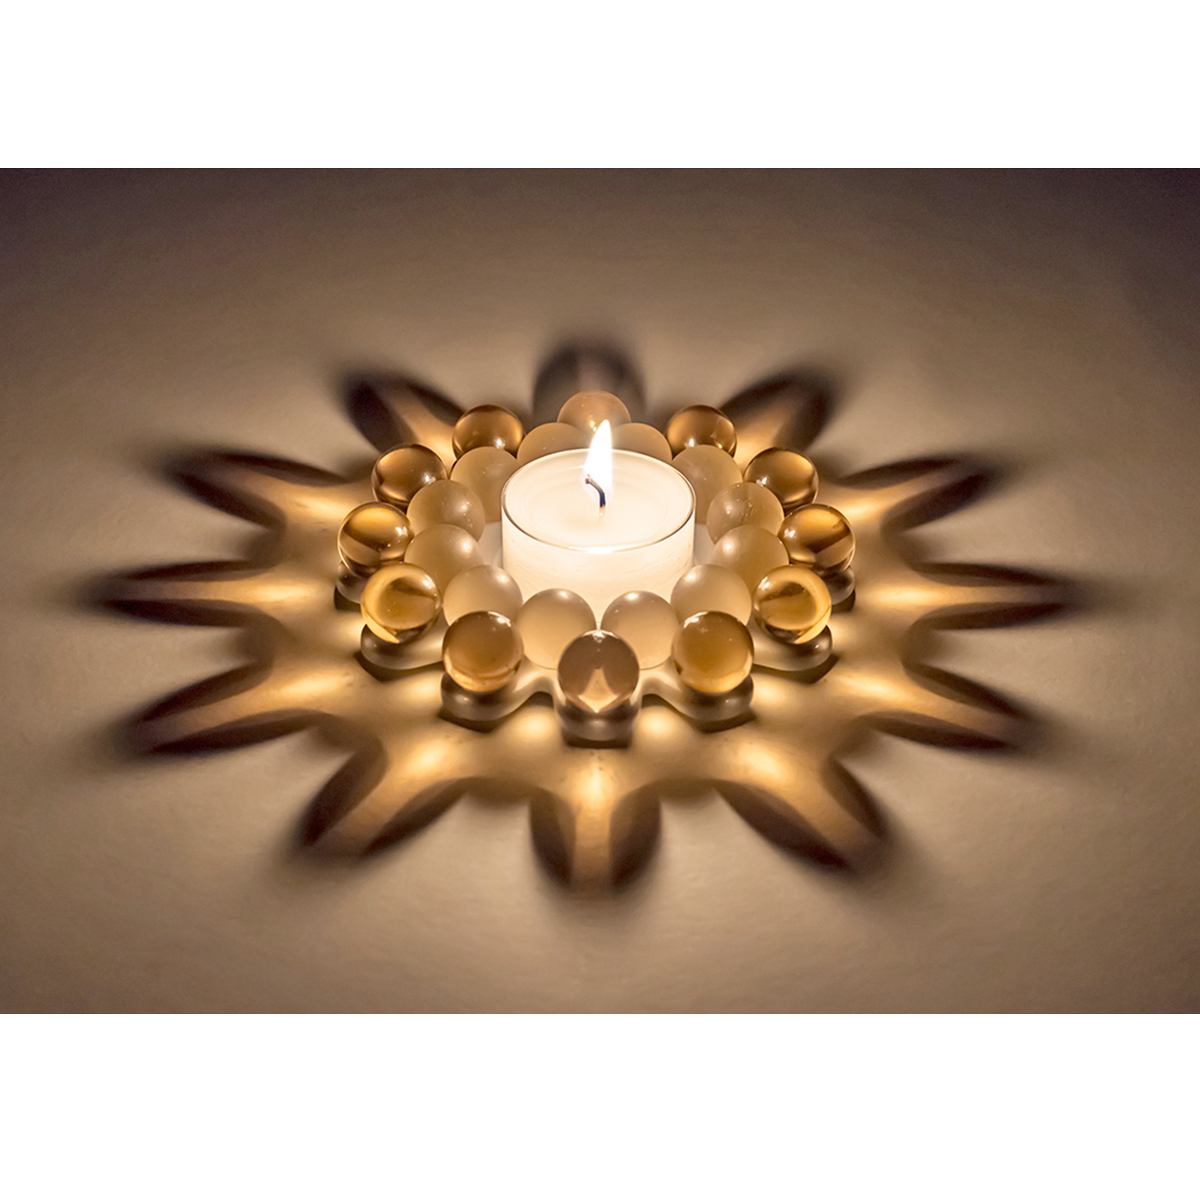 Tealight Candler Holder "Glass Bead Star" with Beautiful Light Refraction – Whisky